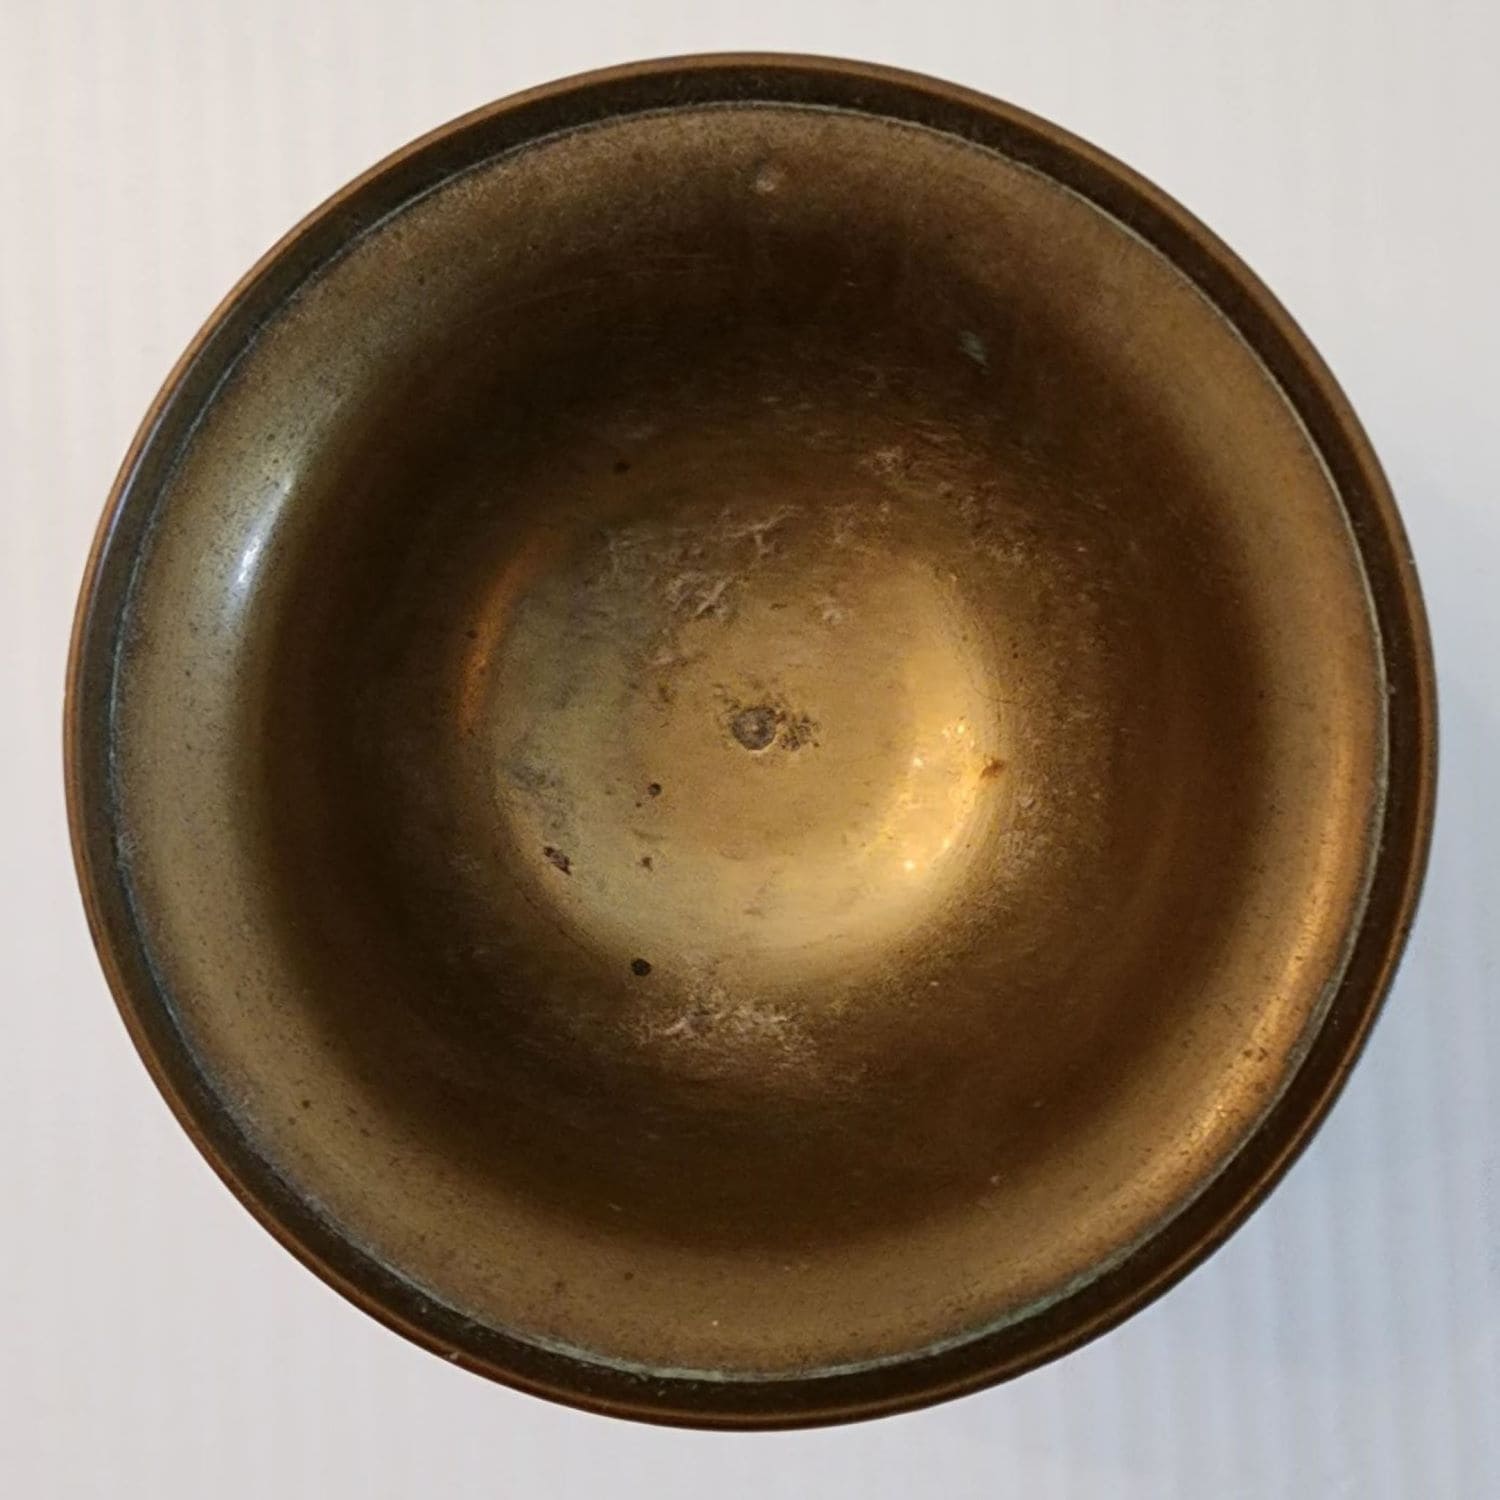 A brass bowl with an intricate design etched on its surface.